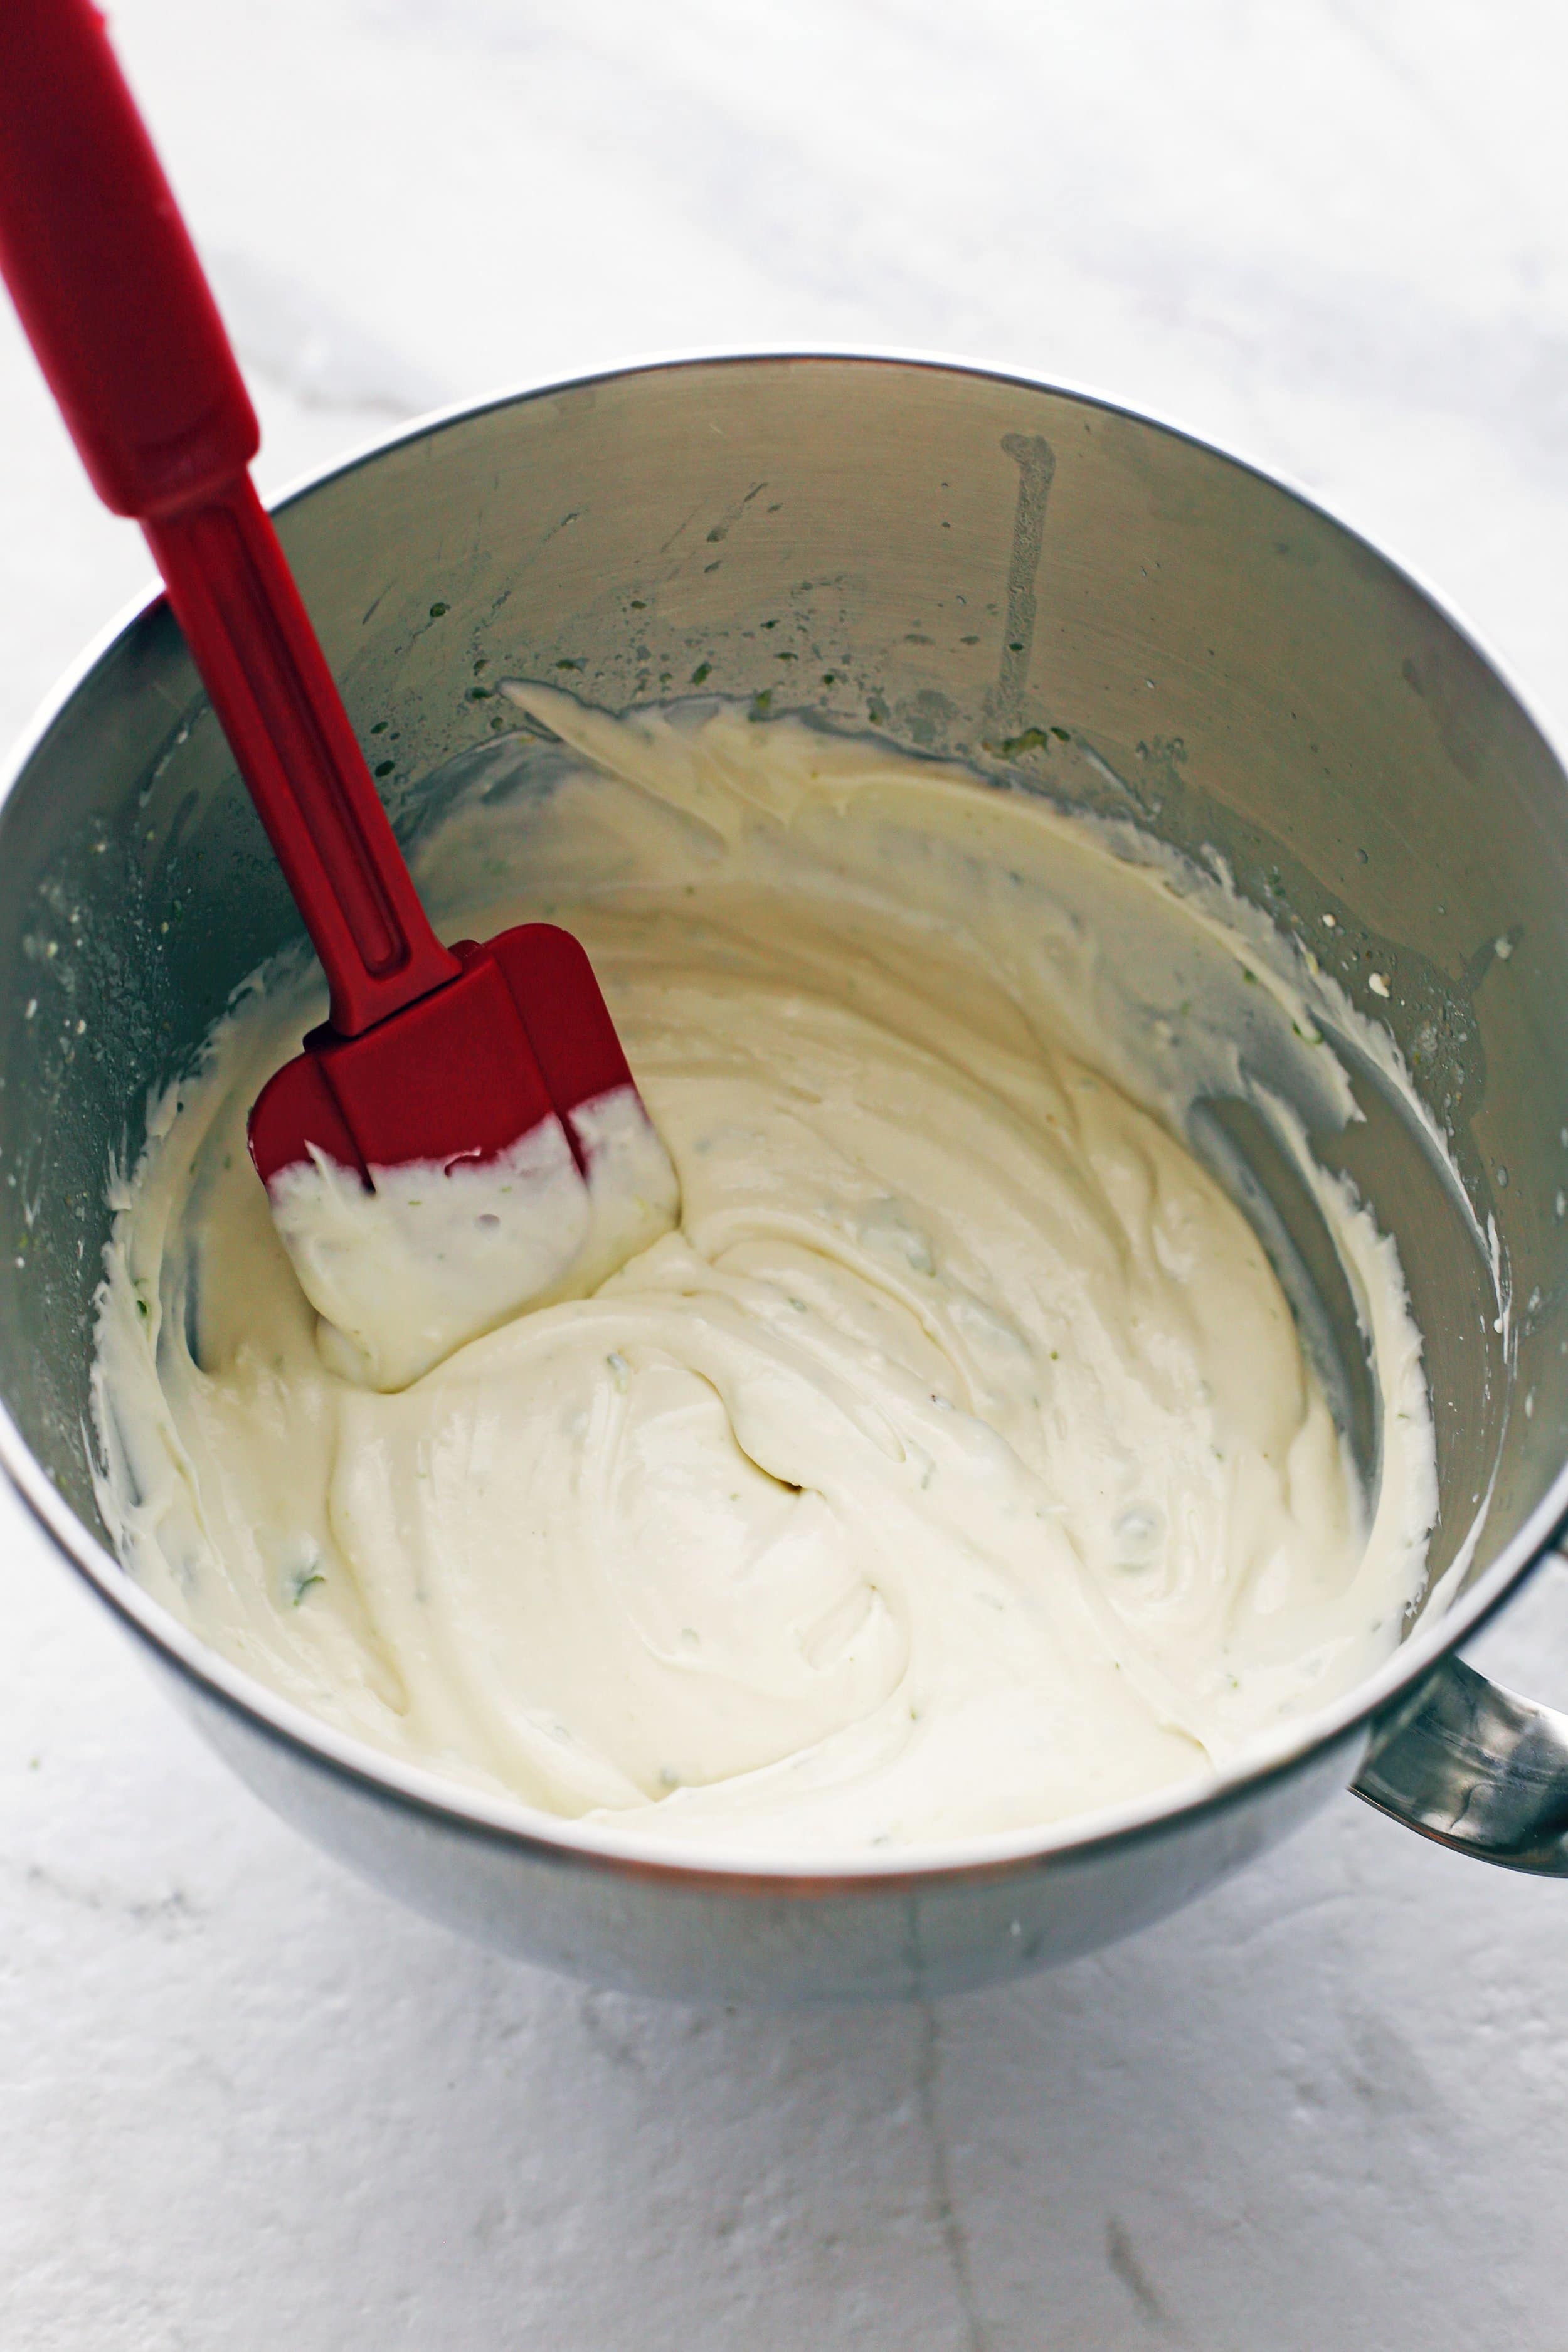 In a large mixing bowl, mascarpone, cream cheese, lime juice and zest, vanilla extract, and salt is combined together to form a creamy, thick filling